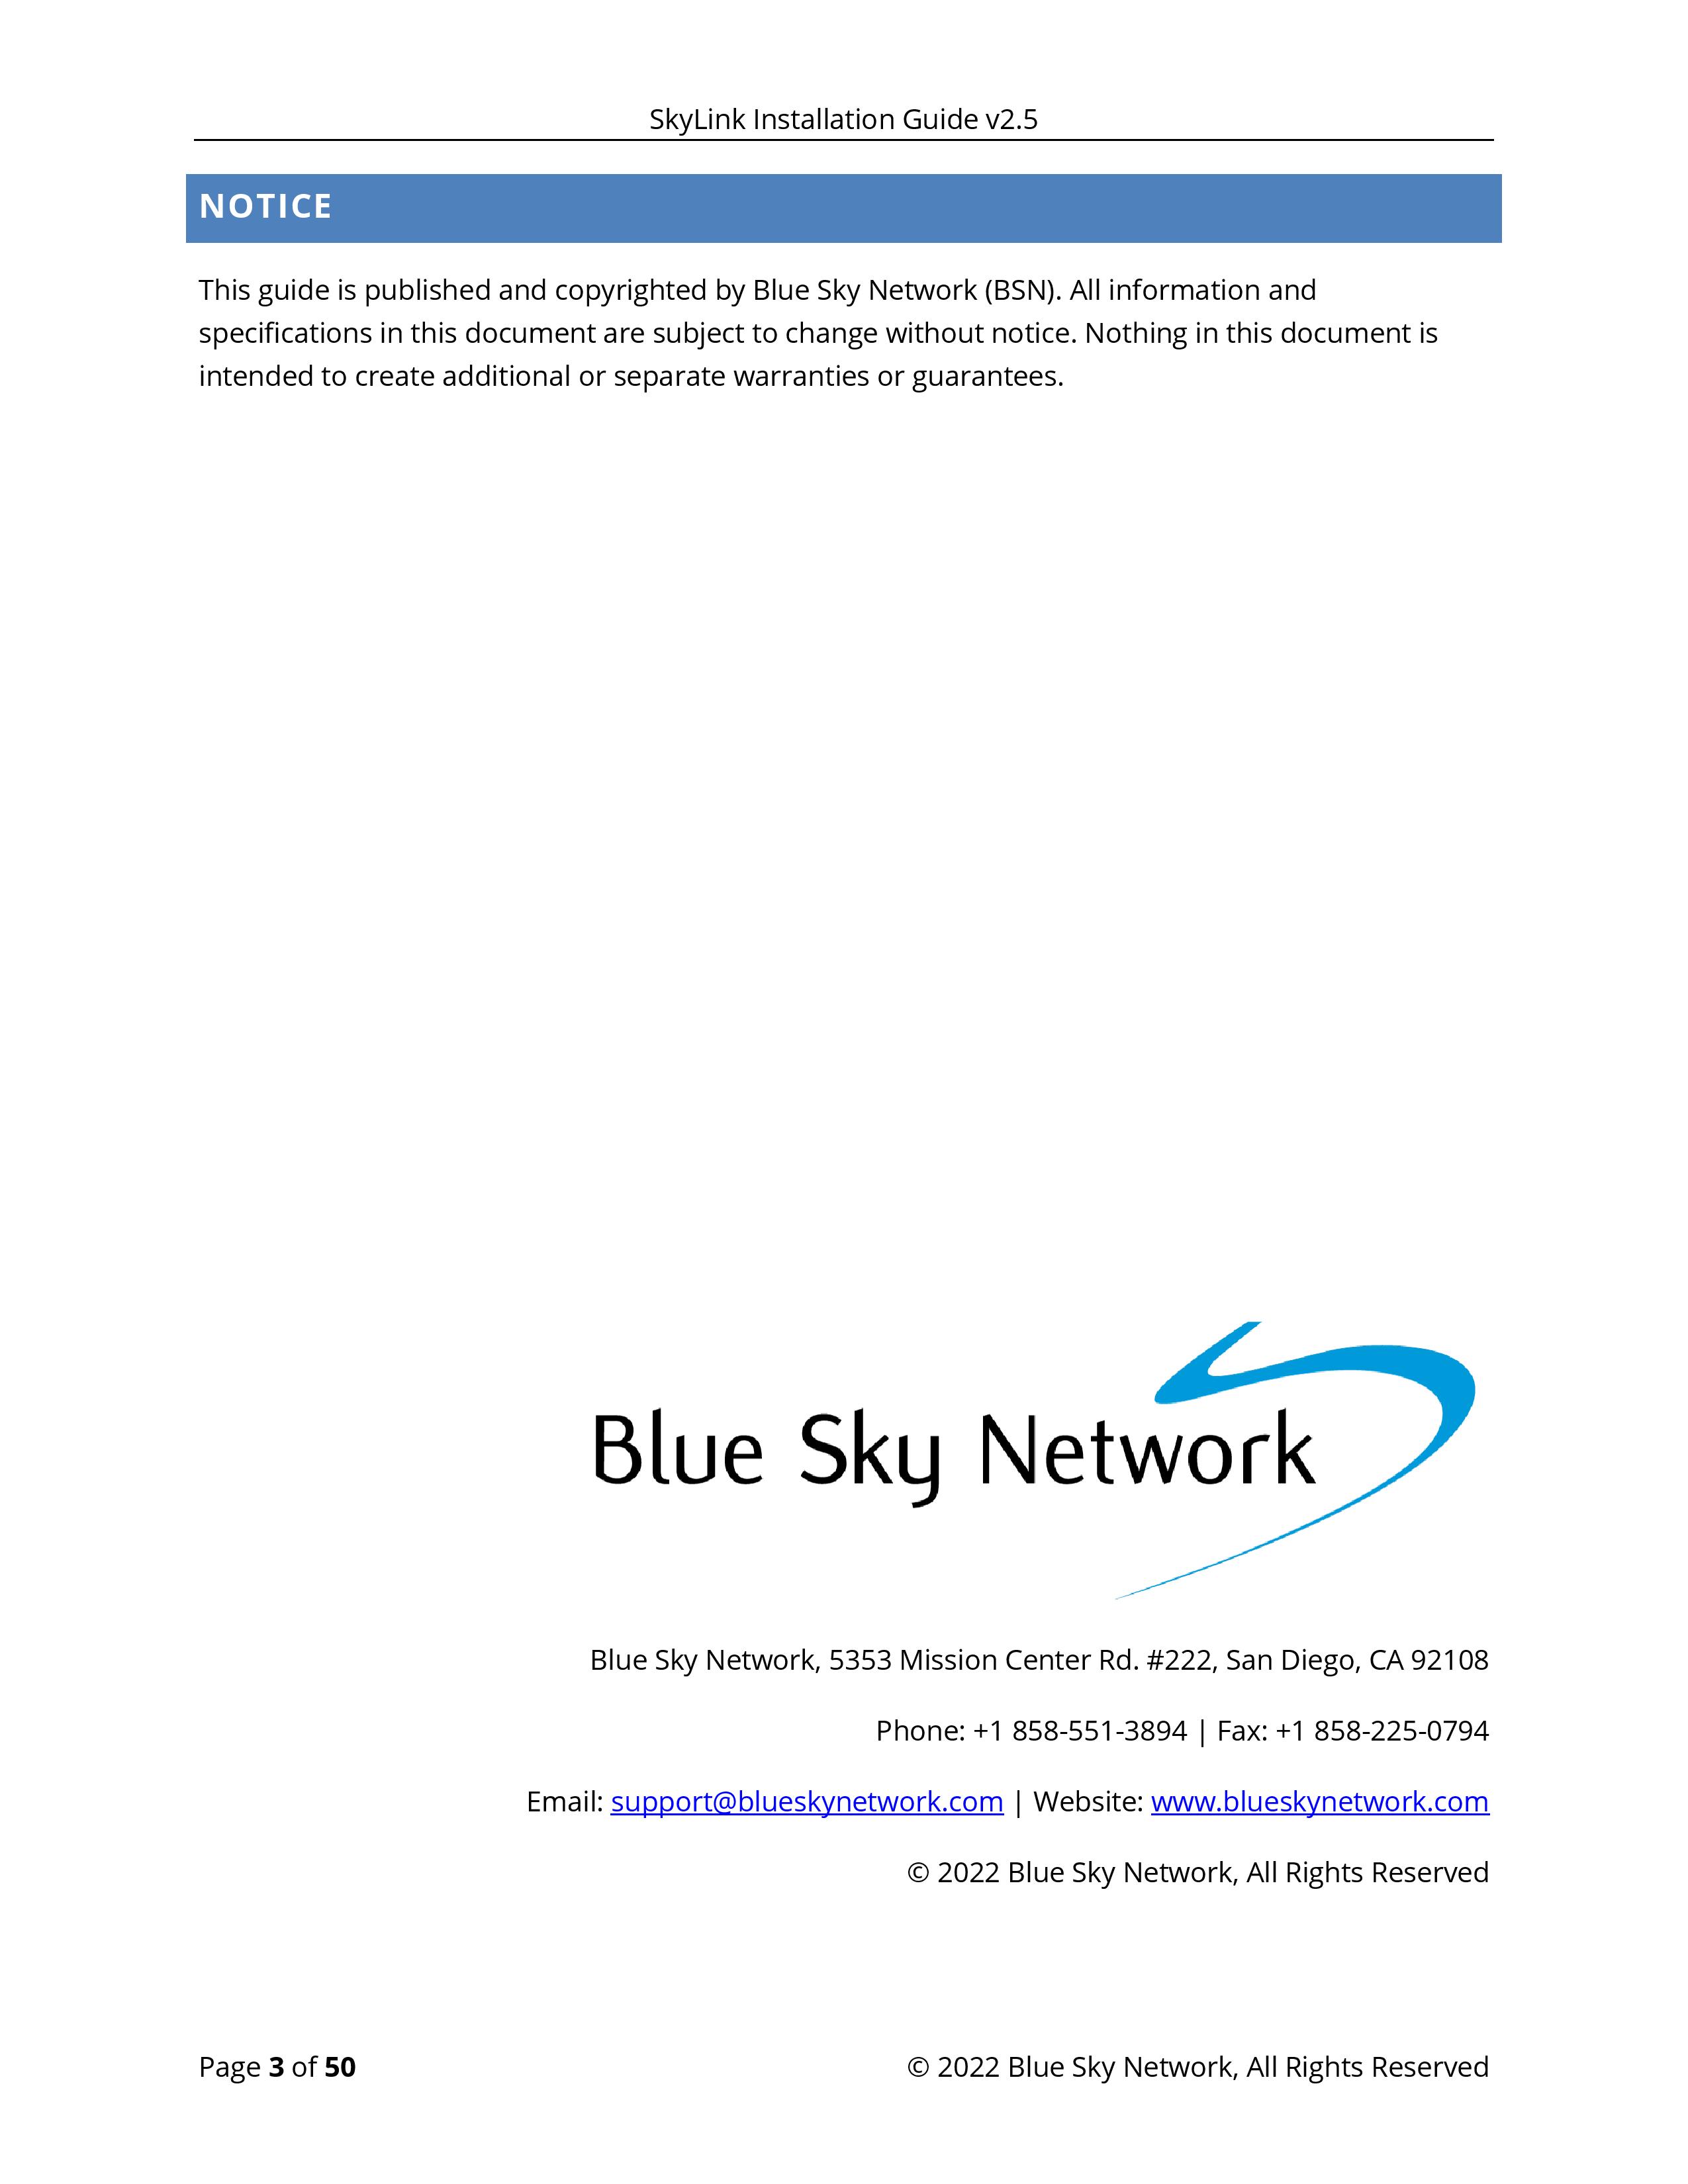 SkyLink-Install-Guide-page-003.jpg